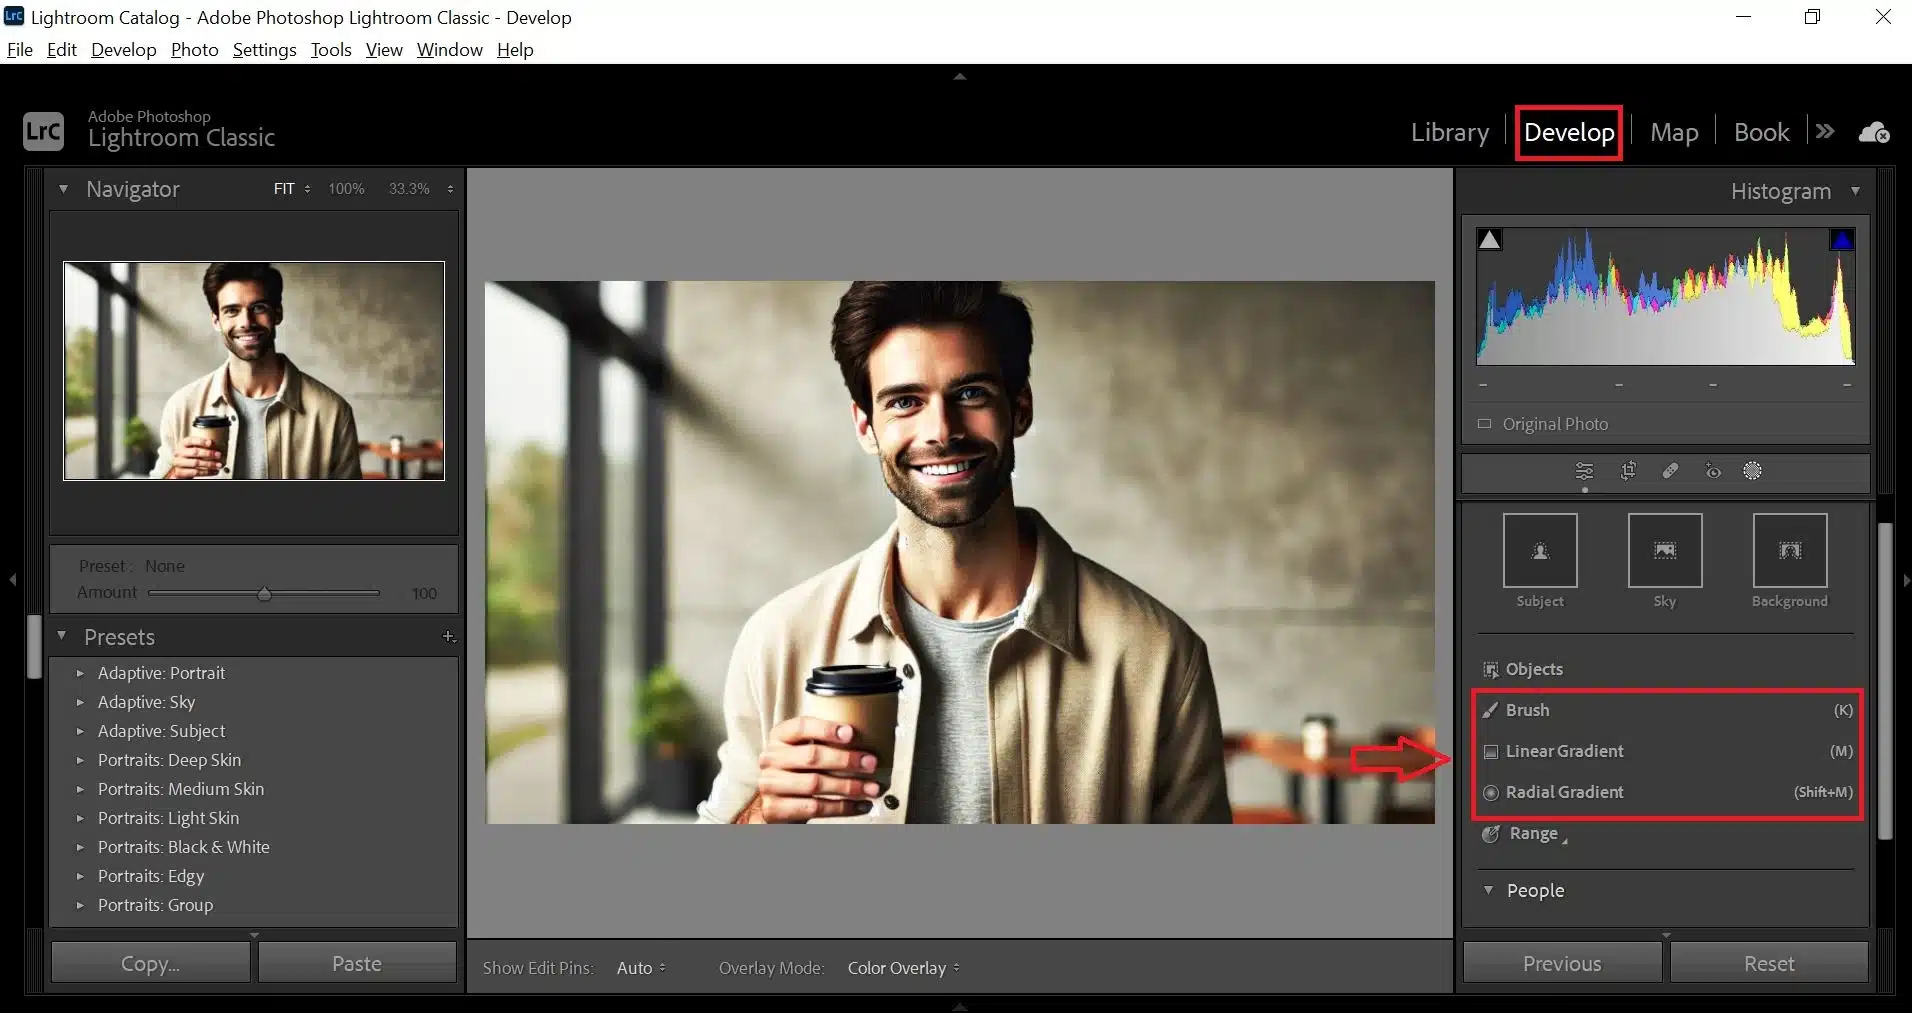 Adobe Lightroom interface showing a man holding a coffee cup and smiling at the camera. The Develop module is open, and the radial gradient tool is highlighted on the right panel.